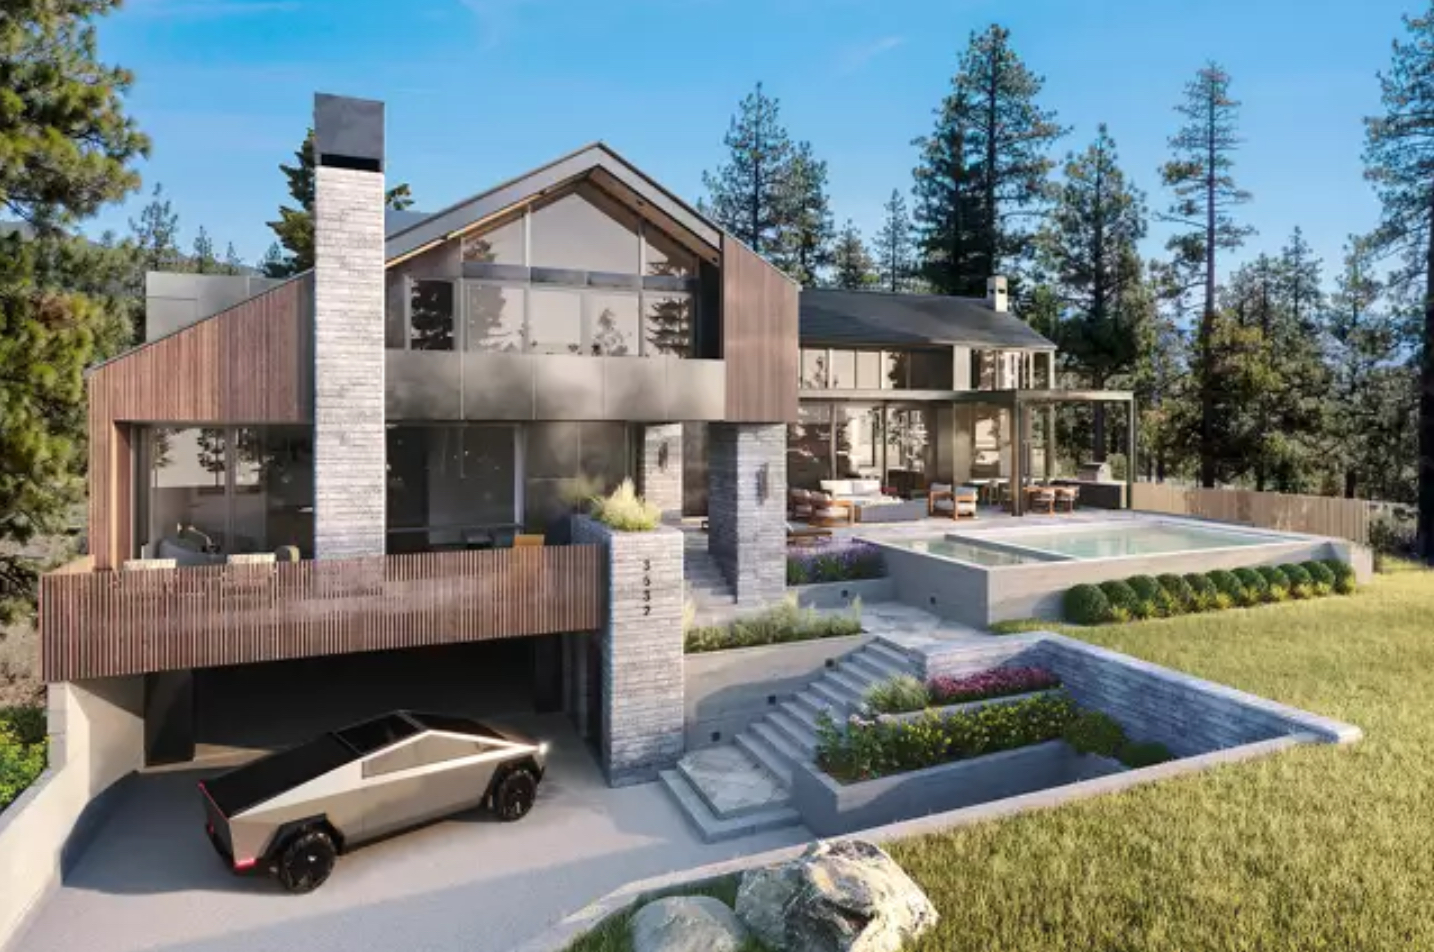 Tesla Cybertruck and Solar Roof Come With This Luxury Estate